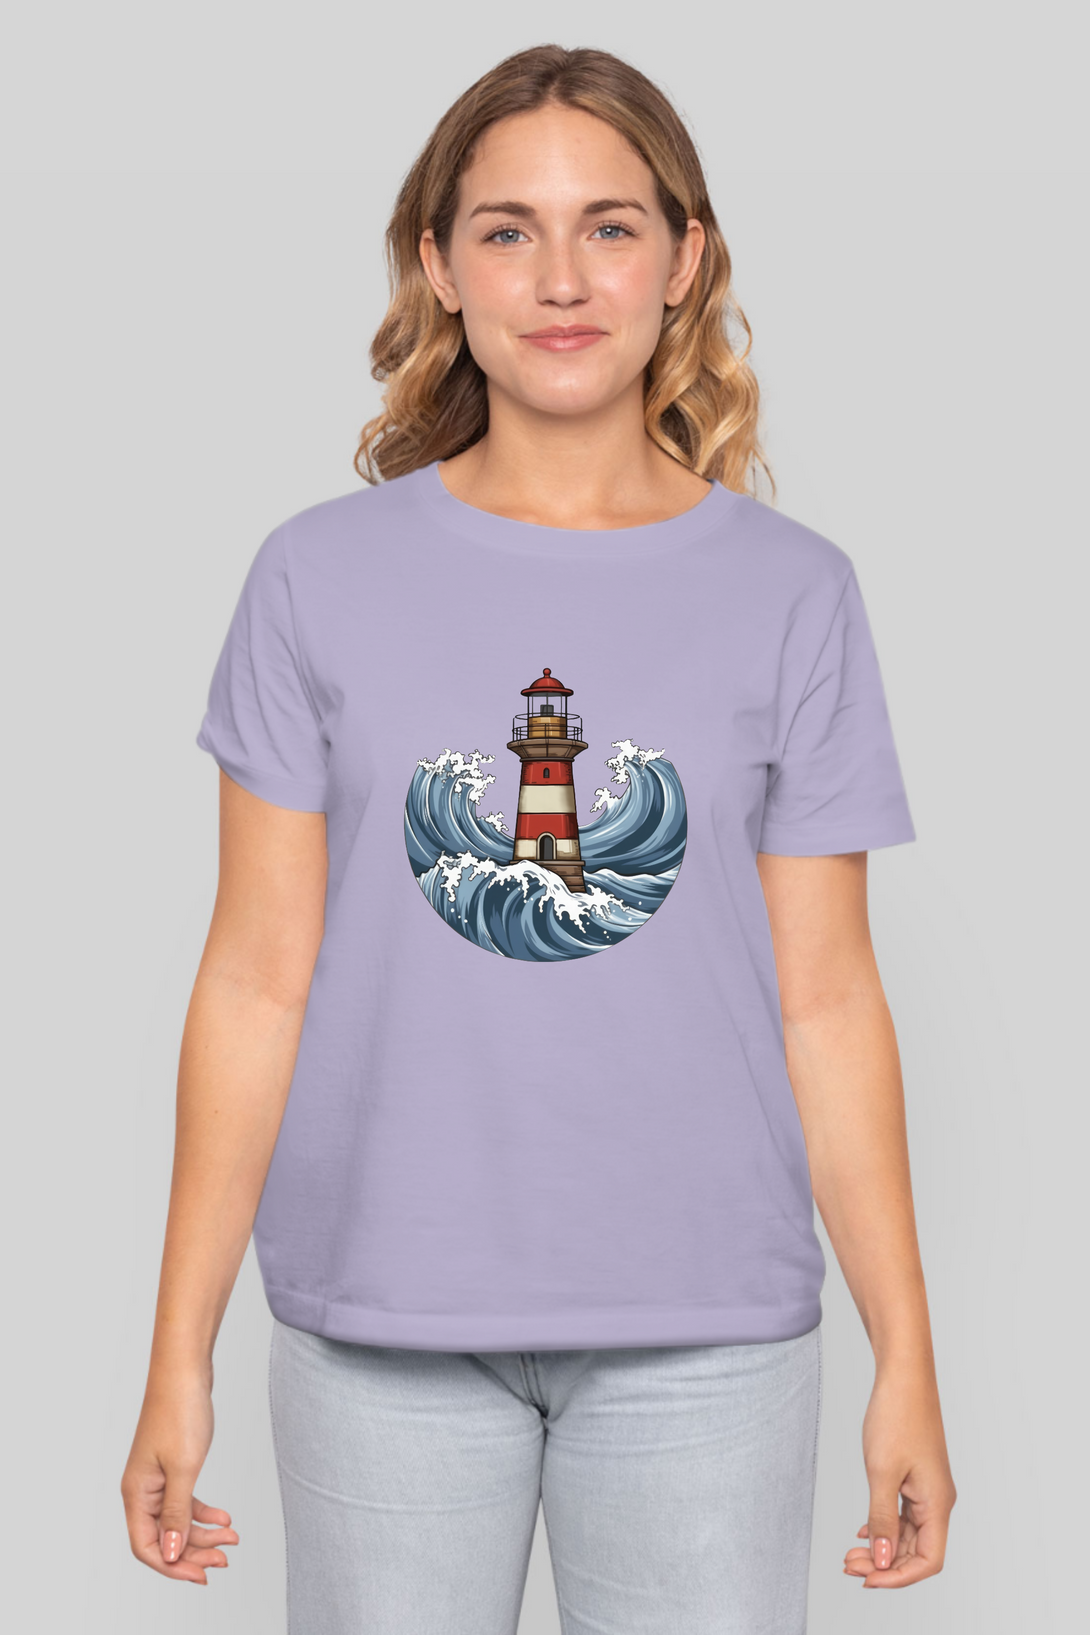 Lighthouse And Waves Printed T-Shirt For Women - WowWaves - 7